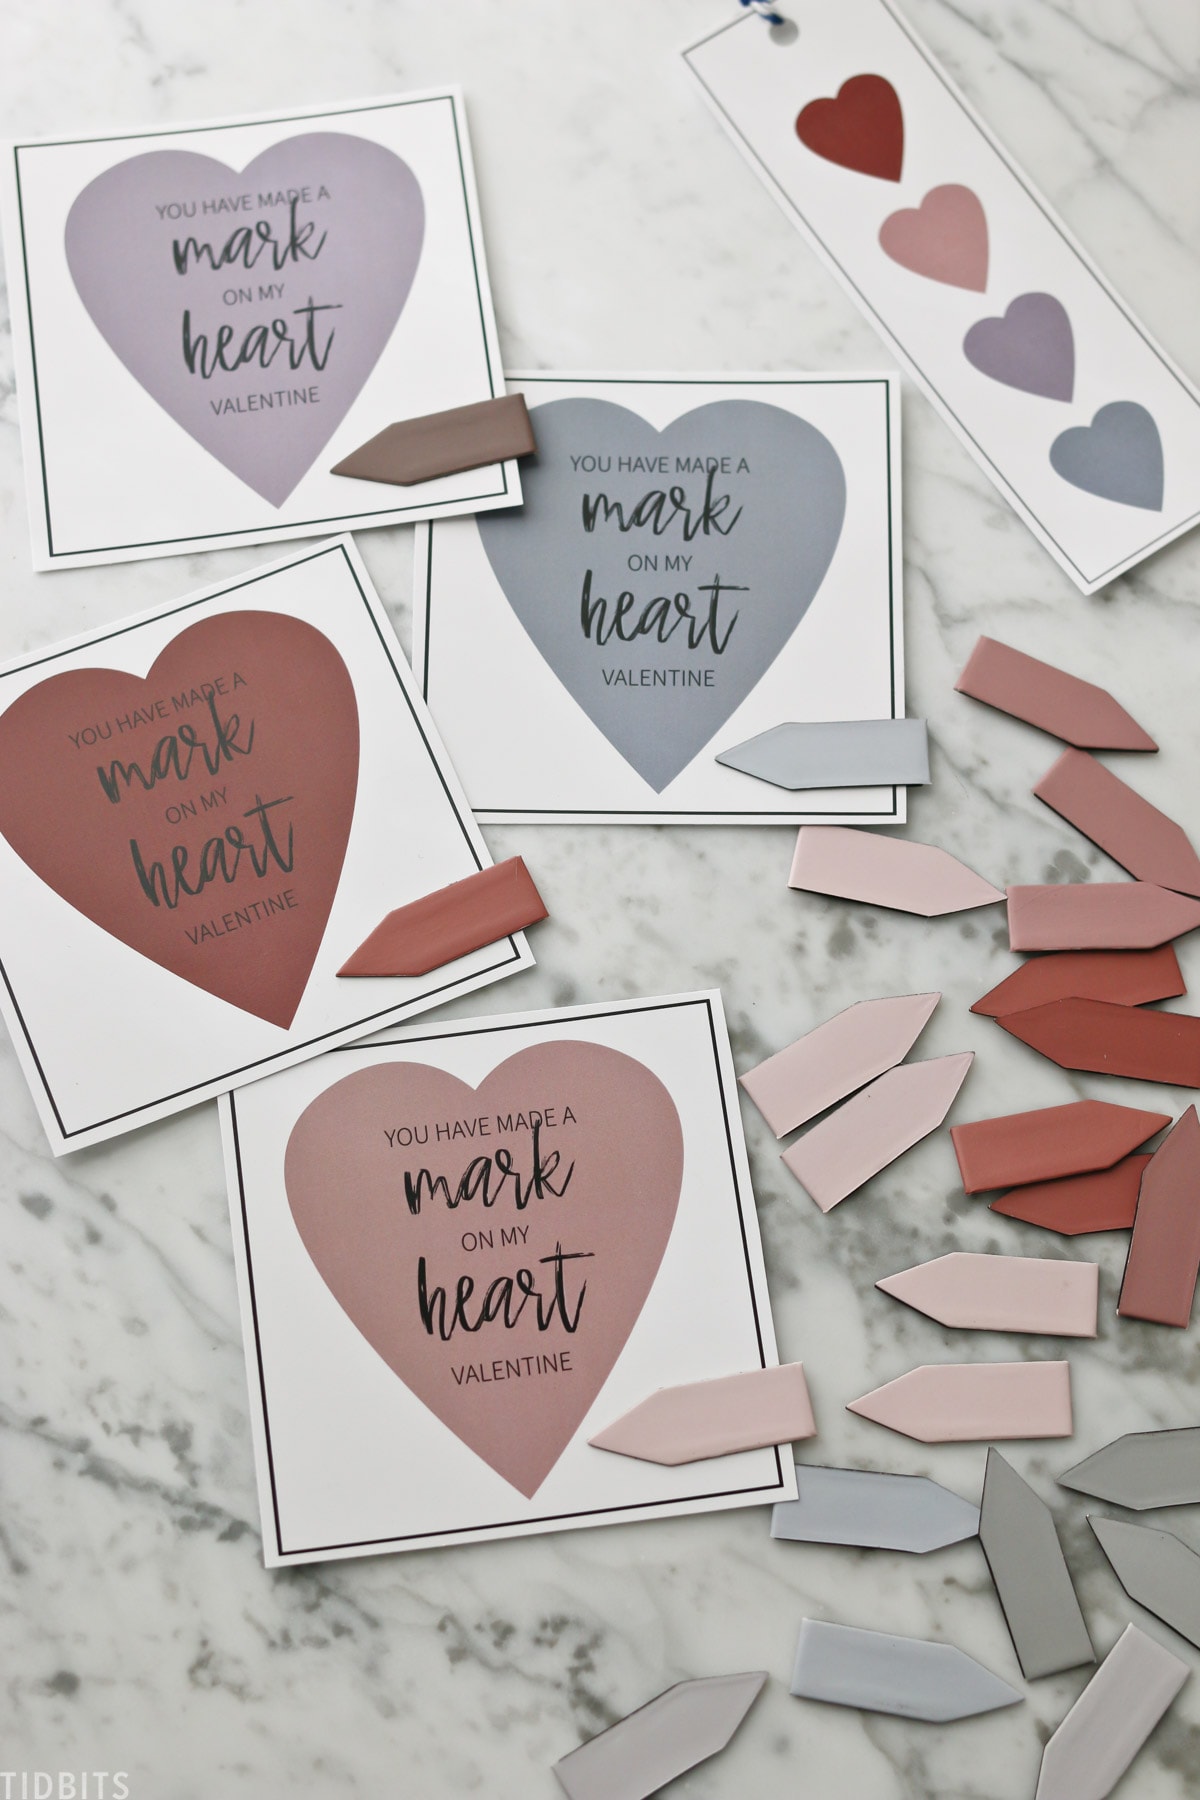 Bookmarks and free printable valentines day cards for students